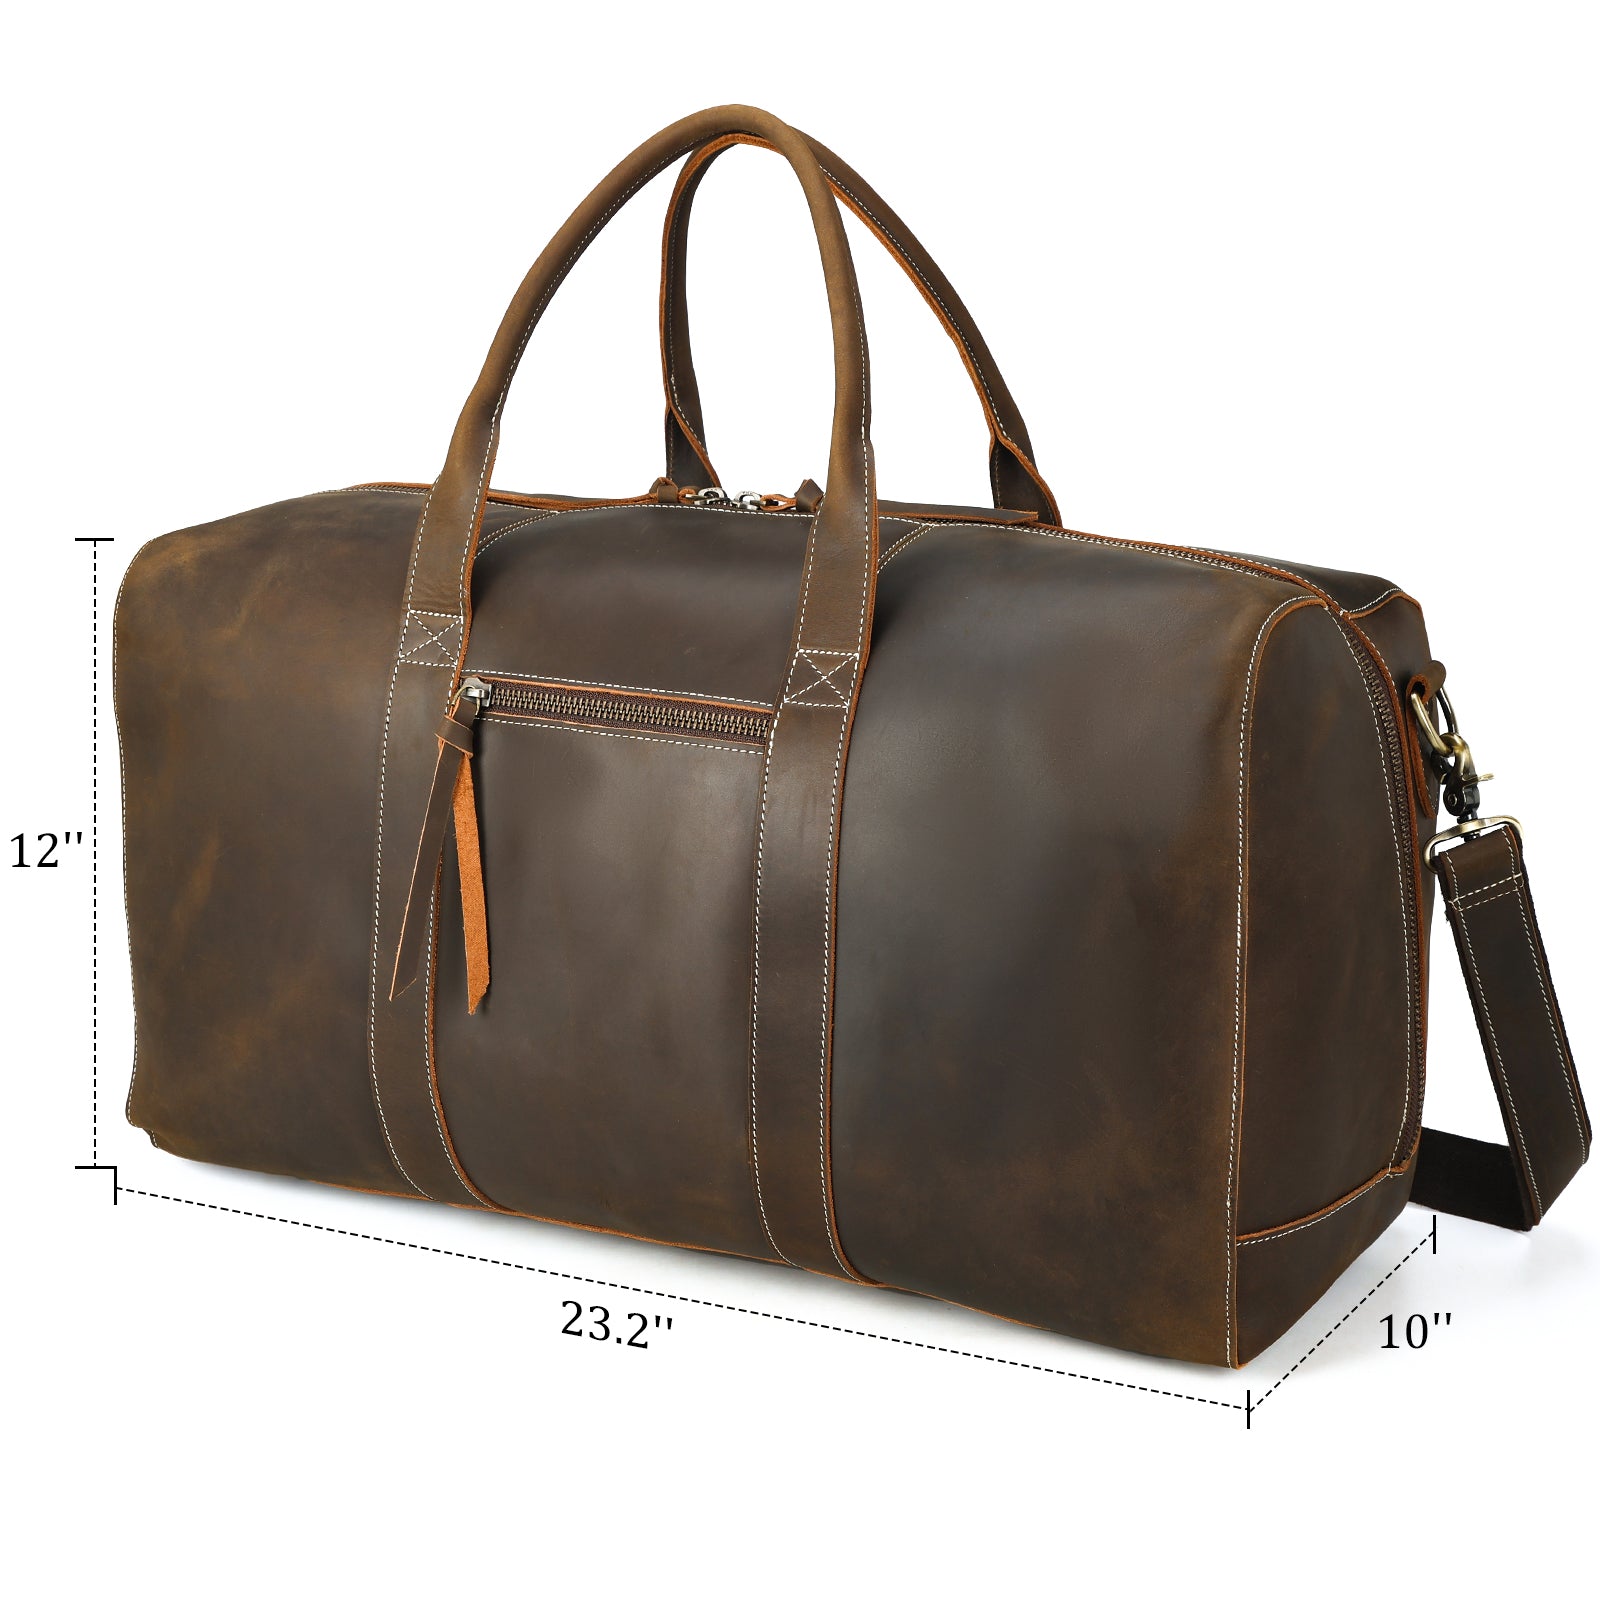 Duffle Bag Classic Travel Luggage for Men Real Leather Top Quality